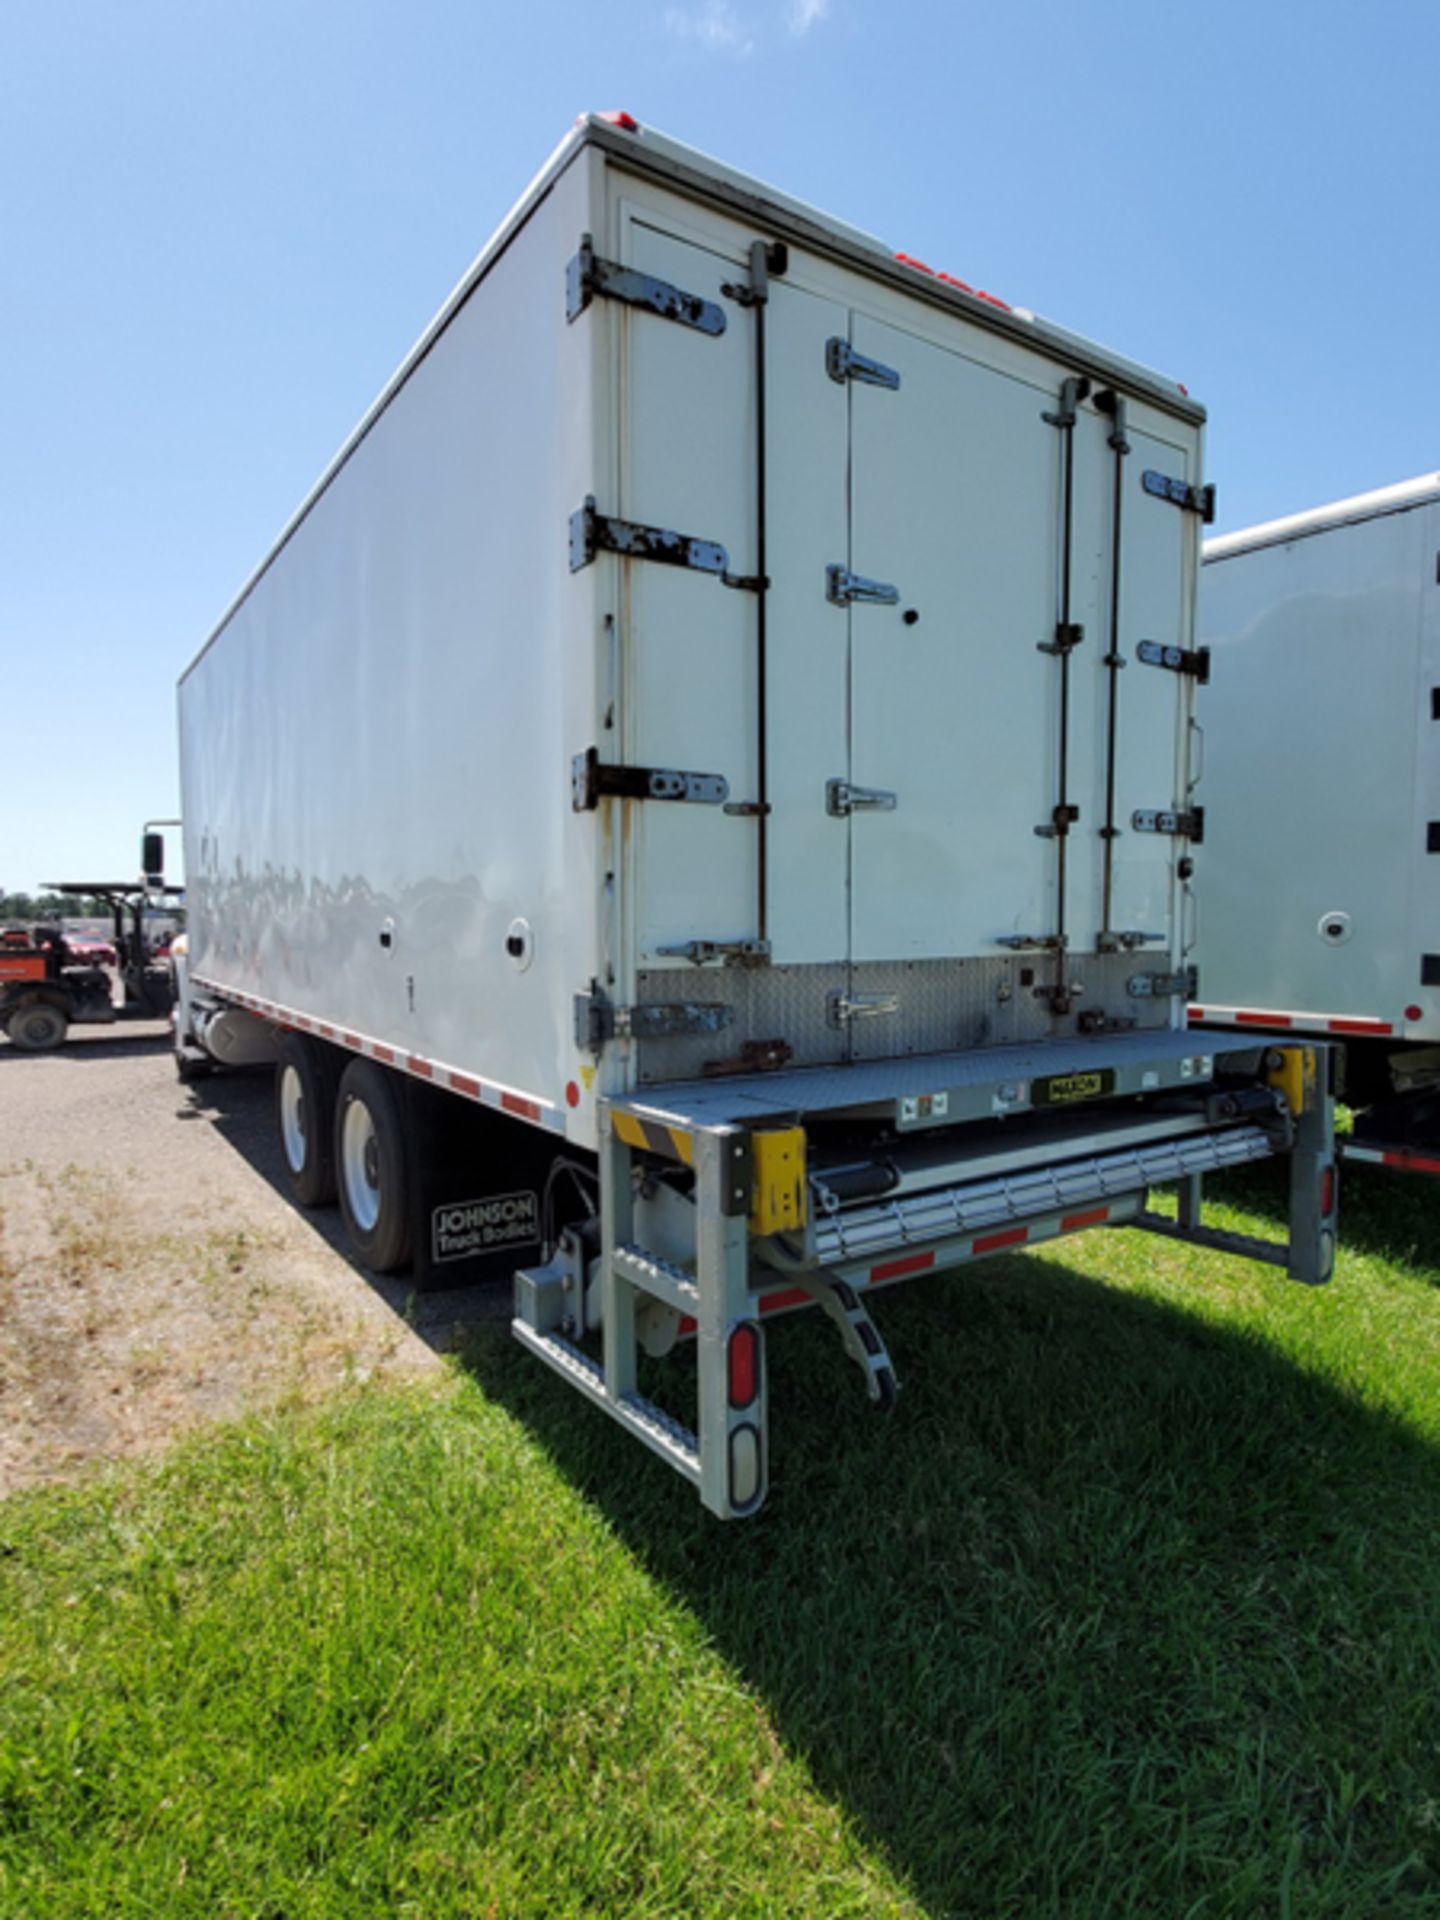 2018 INTERNATIONAL 4400 SBA 6X4 REFRIGERATED BOX TRUCK VIN#: 1HTMSTAR0JH529741, Approx Miles: 40450, - Image 4 of 9